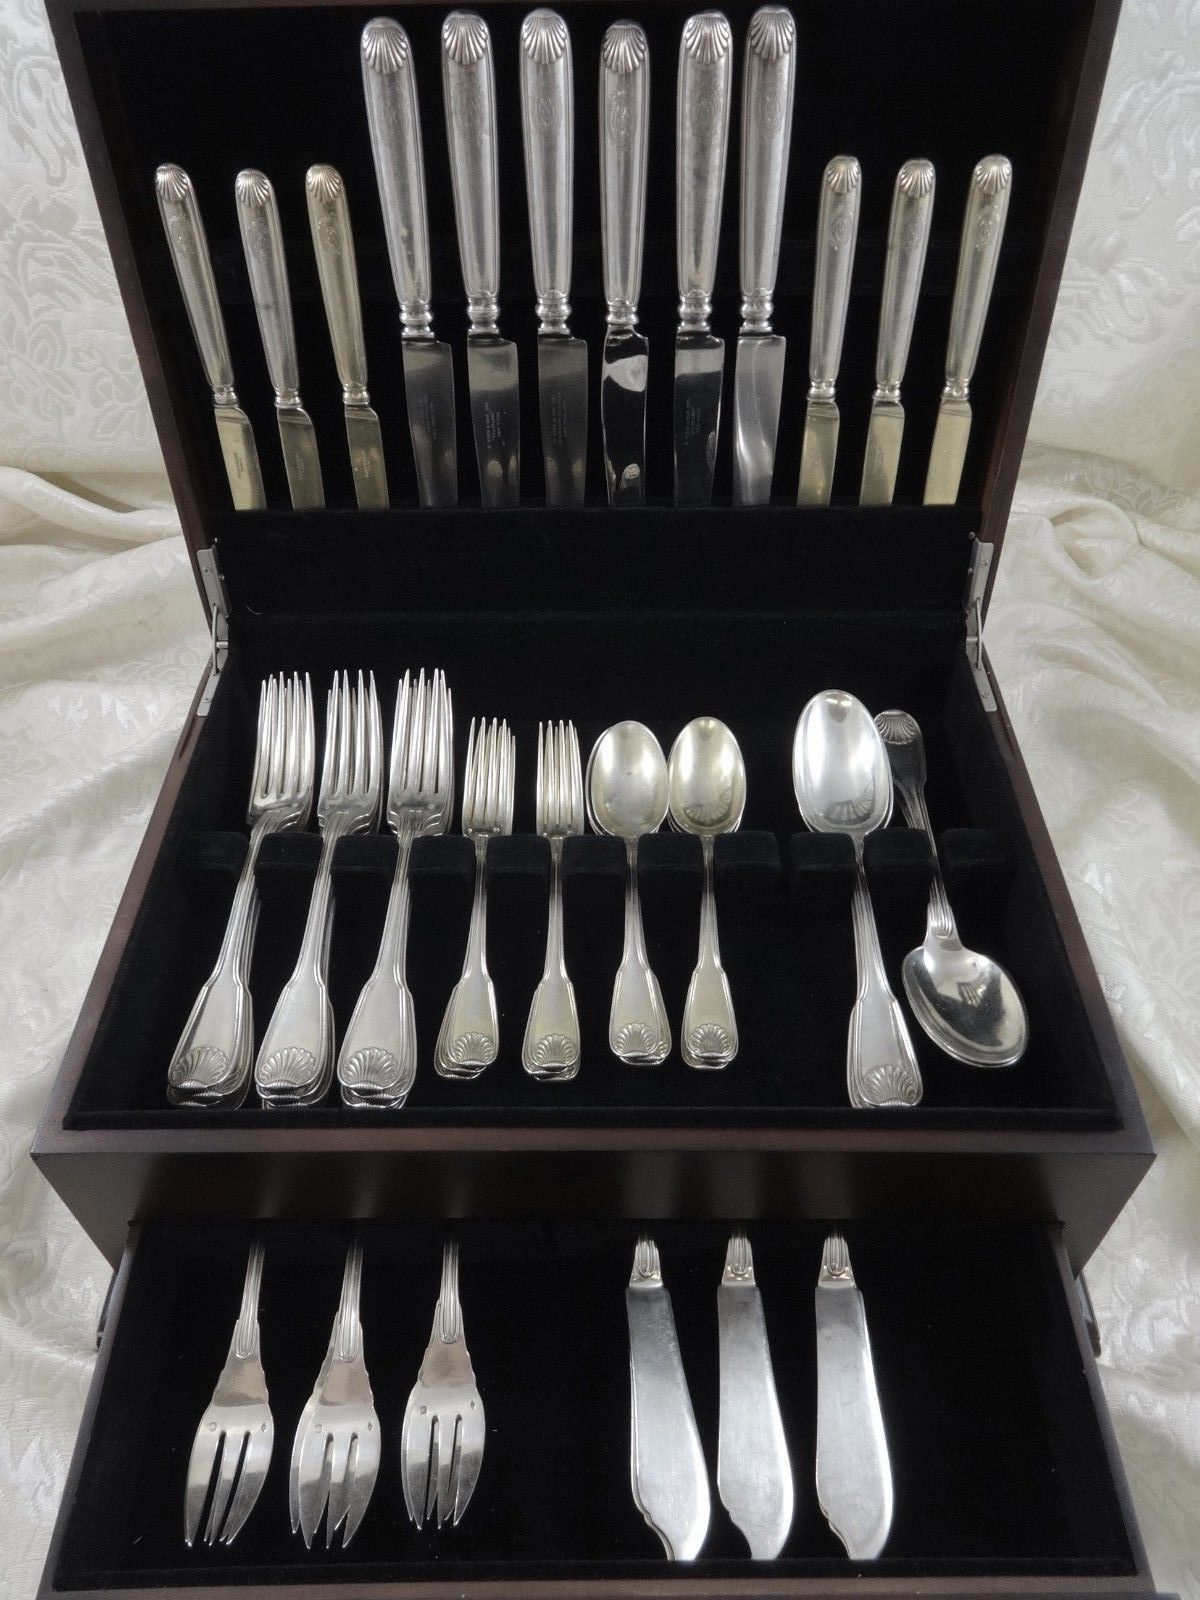 These handcrafted utensils show off the exceptional skill of the legendary Puiforcat silversmiths. The high-quality of Puiforcat cutlery is also revealed in the high percentage of 950/1000 sterling silver. Handmade, exceptional quality set with